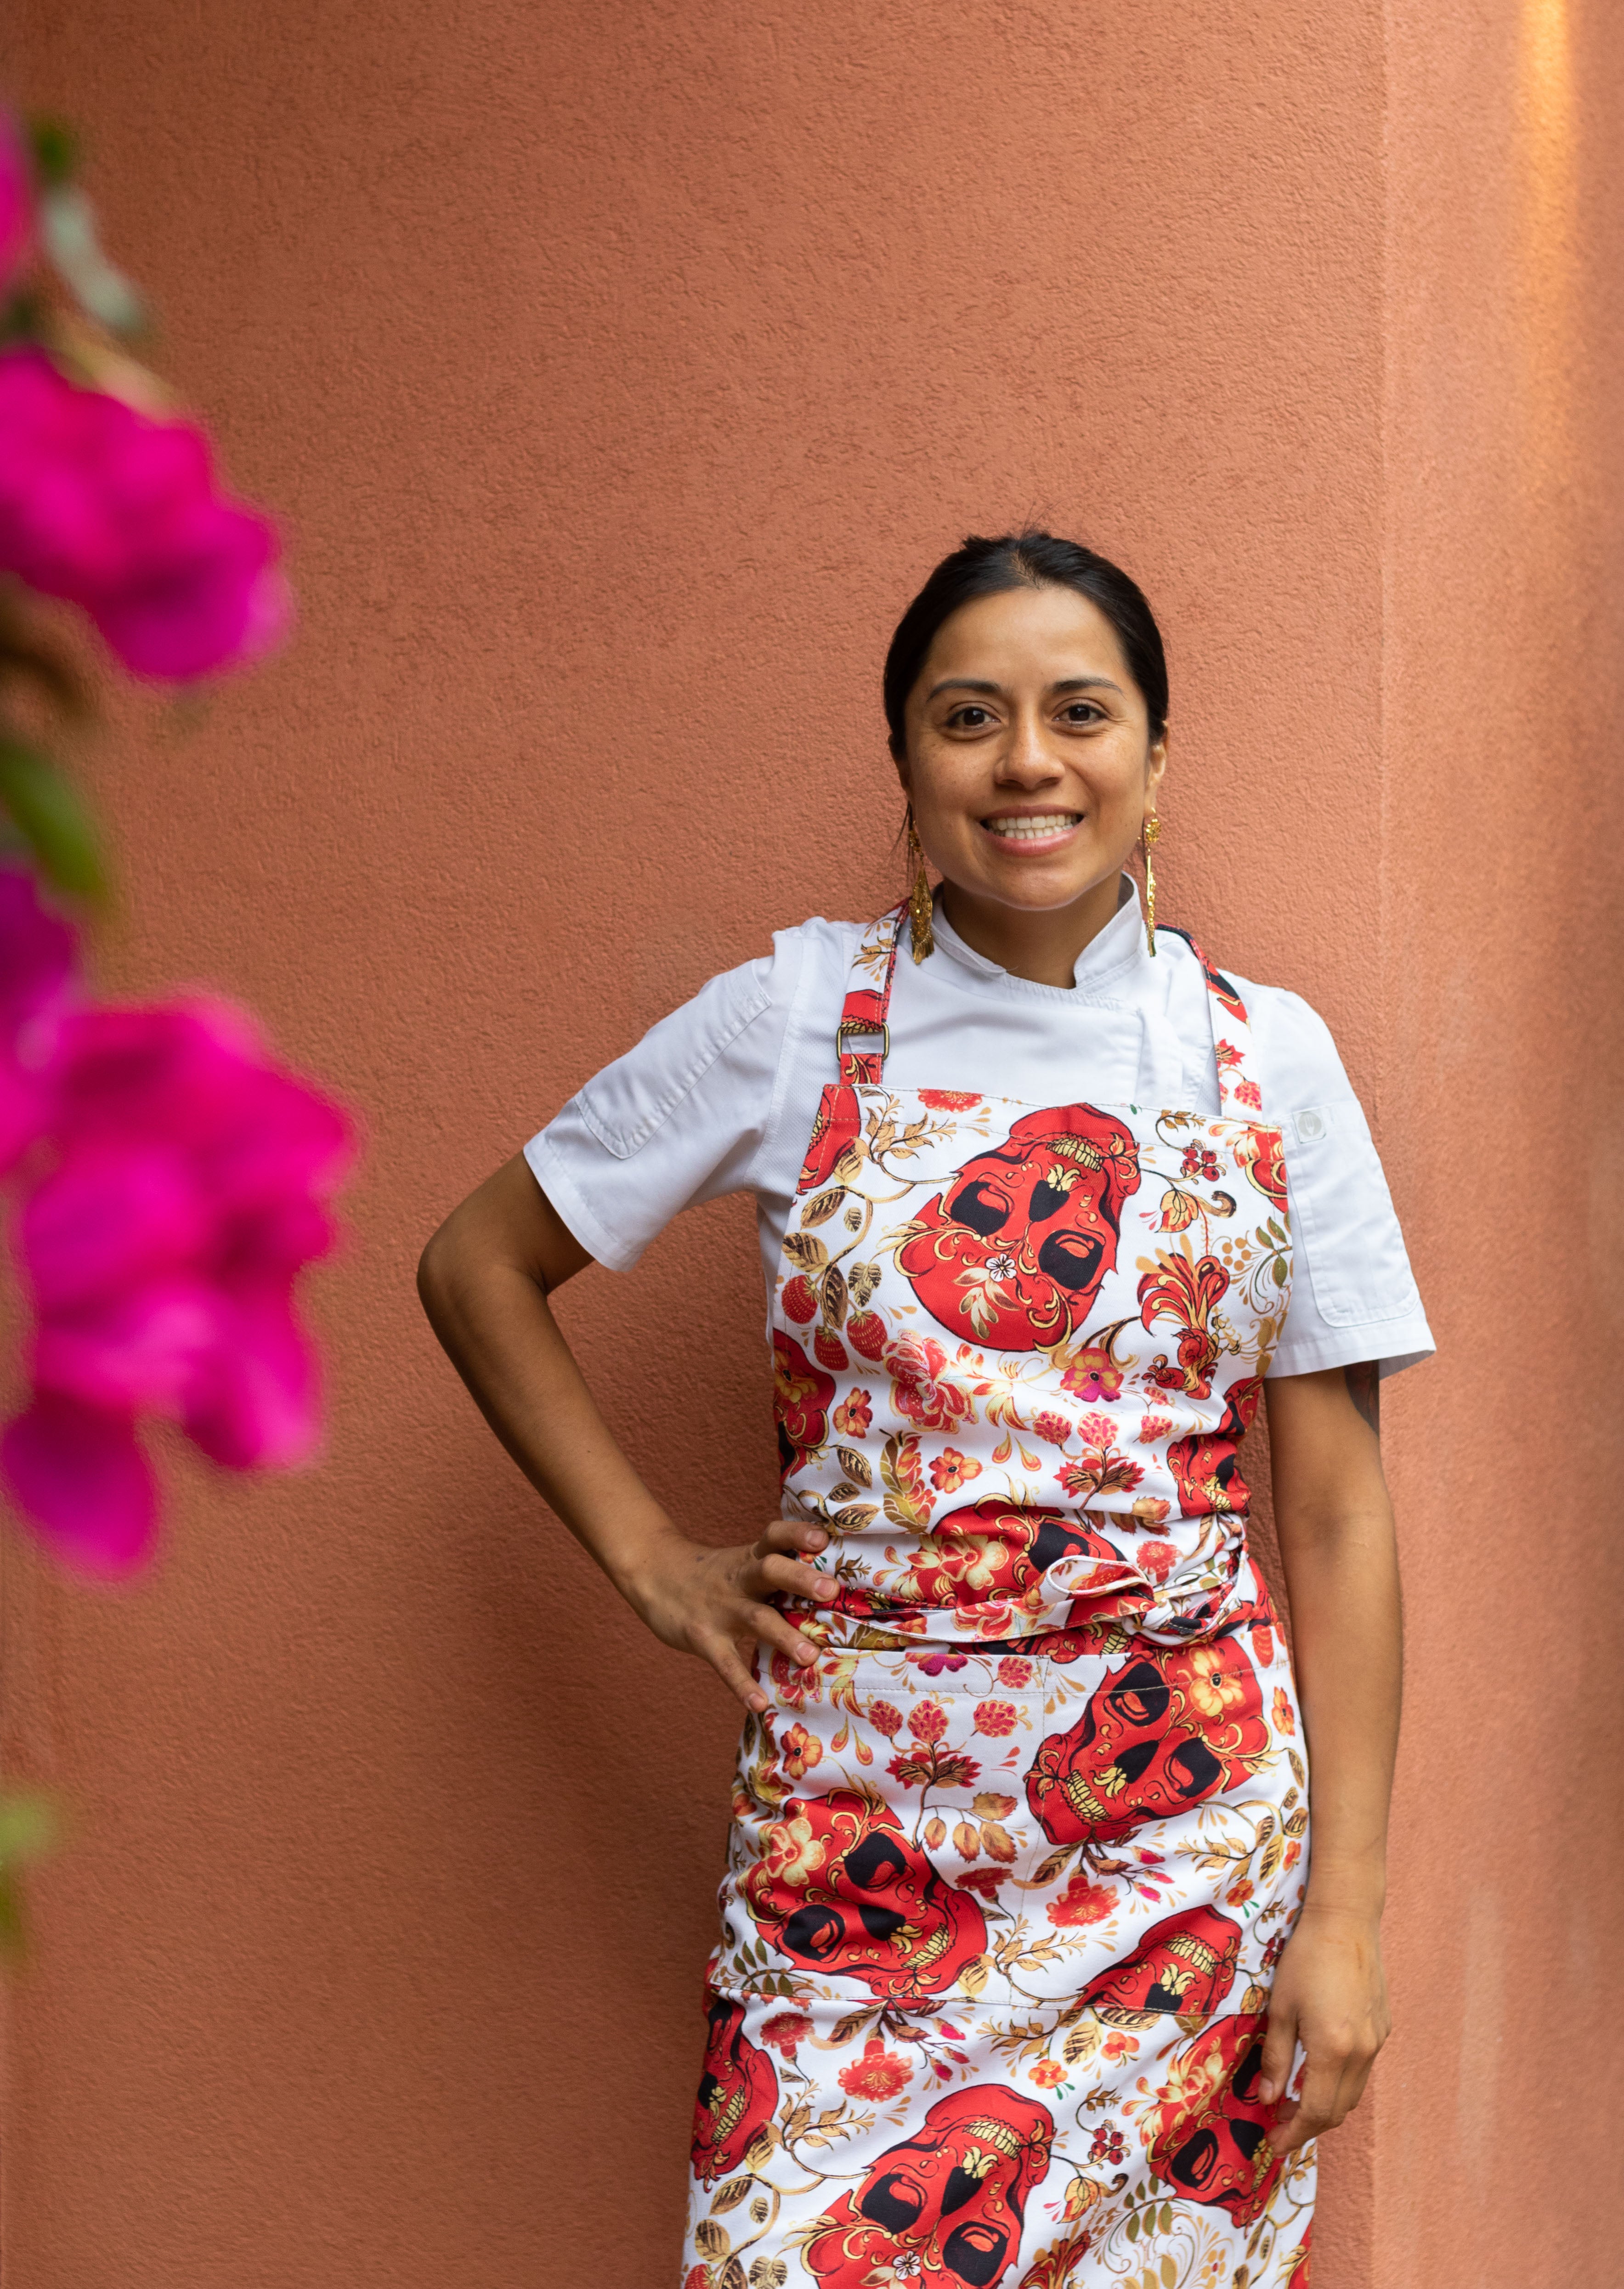 Chef Adriana Cavita is influenced by her family recipes and Mexico City’s street food